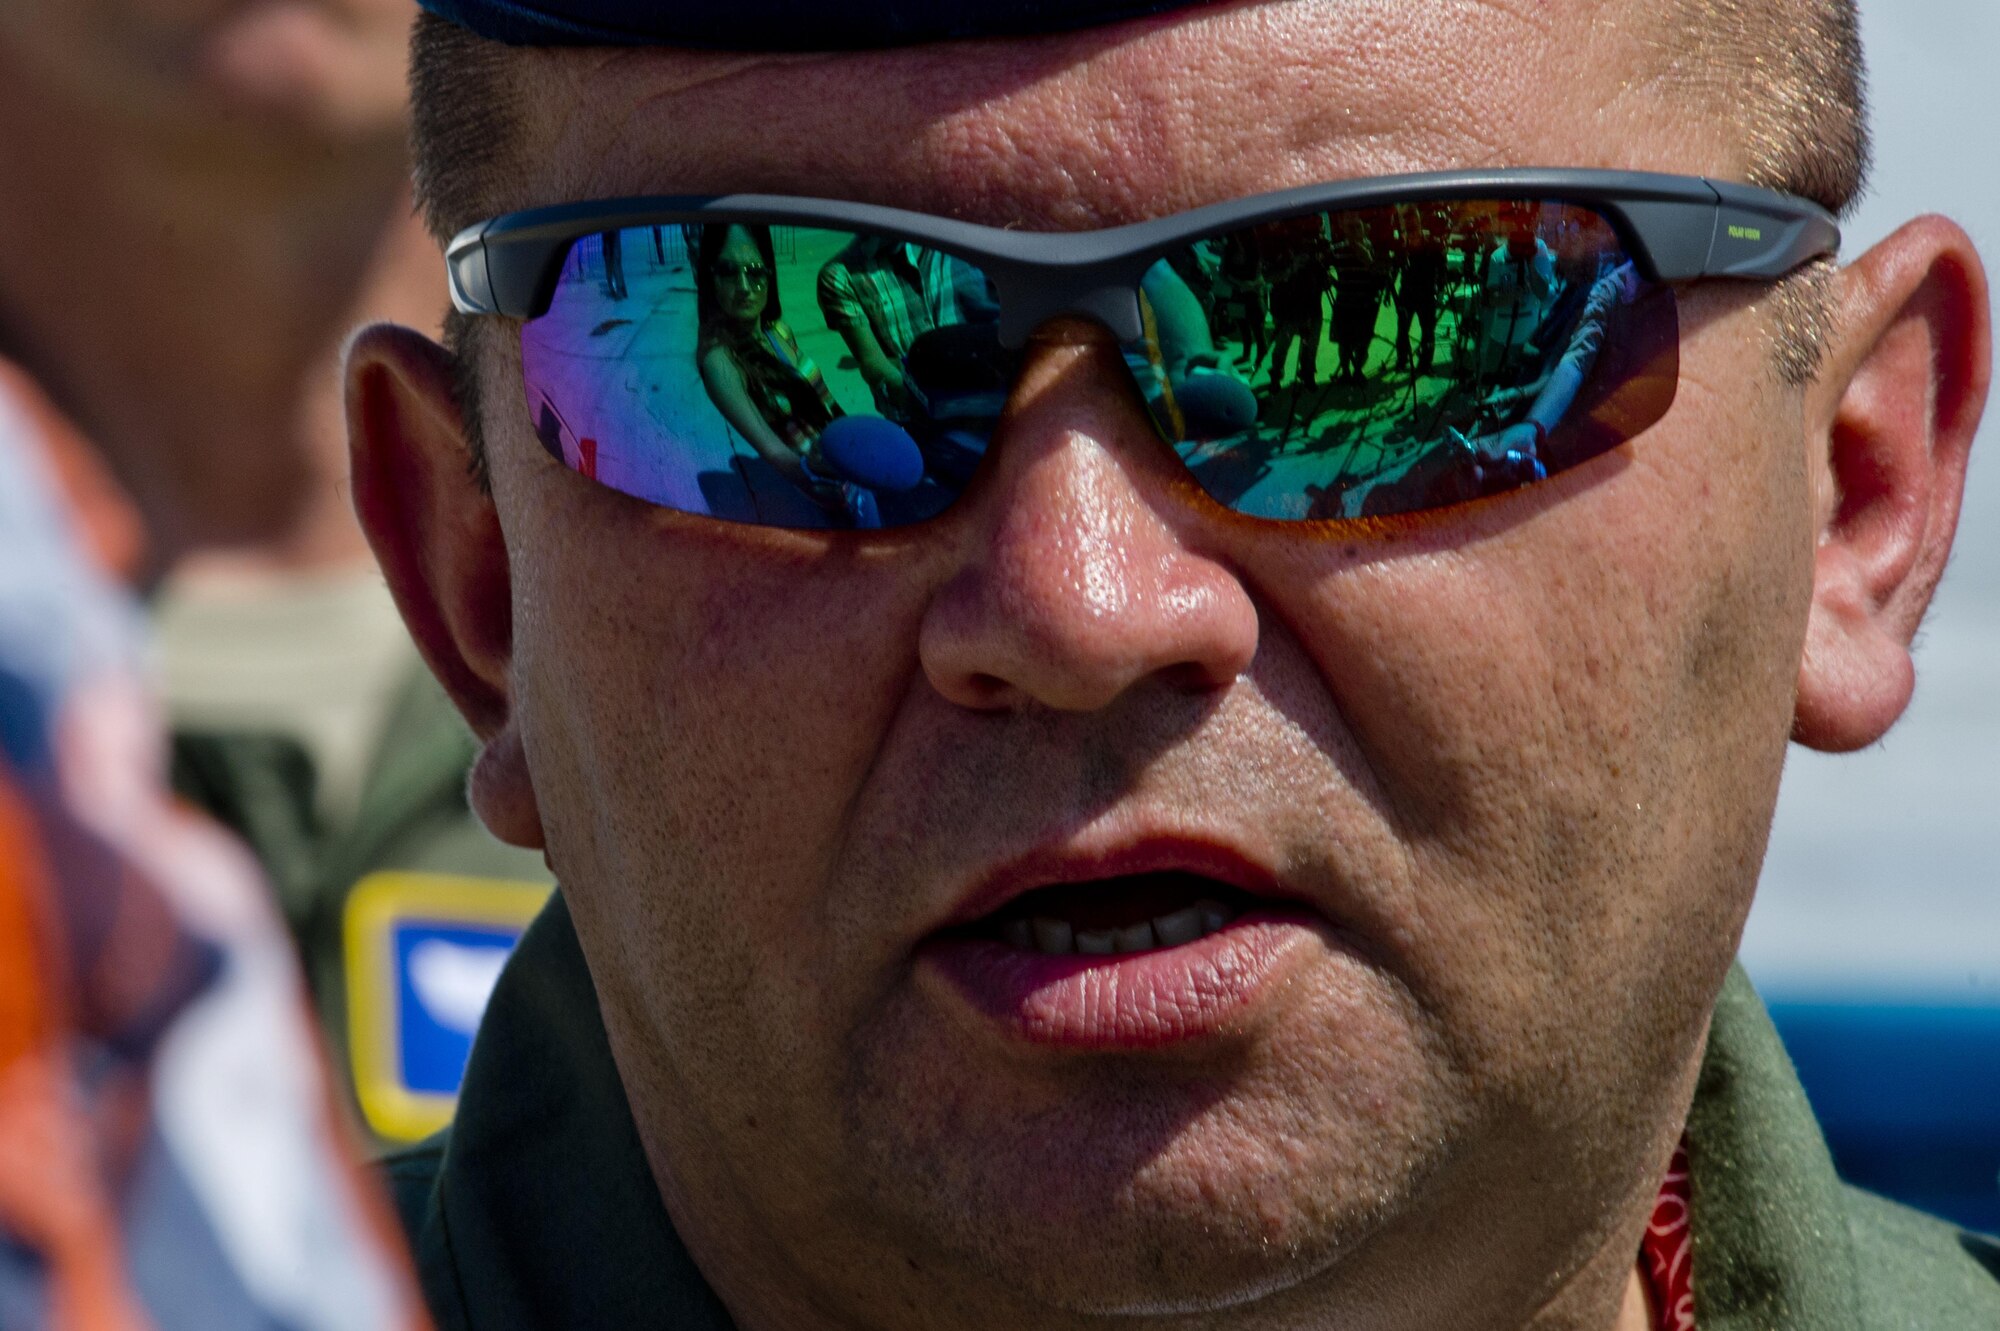 Romanian air force Col. Marius Oatu, 71st Air Base commander, answers reporters' questions during his base's air show and open house at Campia Turzii, Romania, July 23, 2016. The aviation demonstration took place during the middle of the U.S. Air Force's 194th Expeditionary Fighter Squadron's six-month long theater security package deployment to Europe in support of Operation Atlantic Resolve, which aims to bolster the U.S.'s continued commitment to the collective security of NATO and dedication to the enduring peace and stability in the region. The unit, comprised of more than 200 CANG Airmen from the 144th Fighter Wing at Fresno ANG Base, Calif., as well as U.S. Air Force Airmen from the 52nd Fighter Wing at Spangdahlem Air Base, Germany, piloted, maintained and supported the deployment of 12 F-15Cs Eagle fighter aircraft throughout nations like Romania, Iceland, the United Kingdom, the Netherlands, Estonia and among others. The F-15Cs took to the skies alongside the 71st AB's MiG-21 fighter aircraft and Puma helicopters for both the airshow, the second engagement of its kind at Campia Turzii under Operation Atlantic Resolve, and the bilateral flight training, also known as Dacian Eagle 2016. (U.S. Air Force photo by Staff Sgt. Joe W. McFadden/Released)